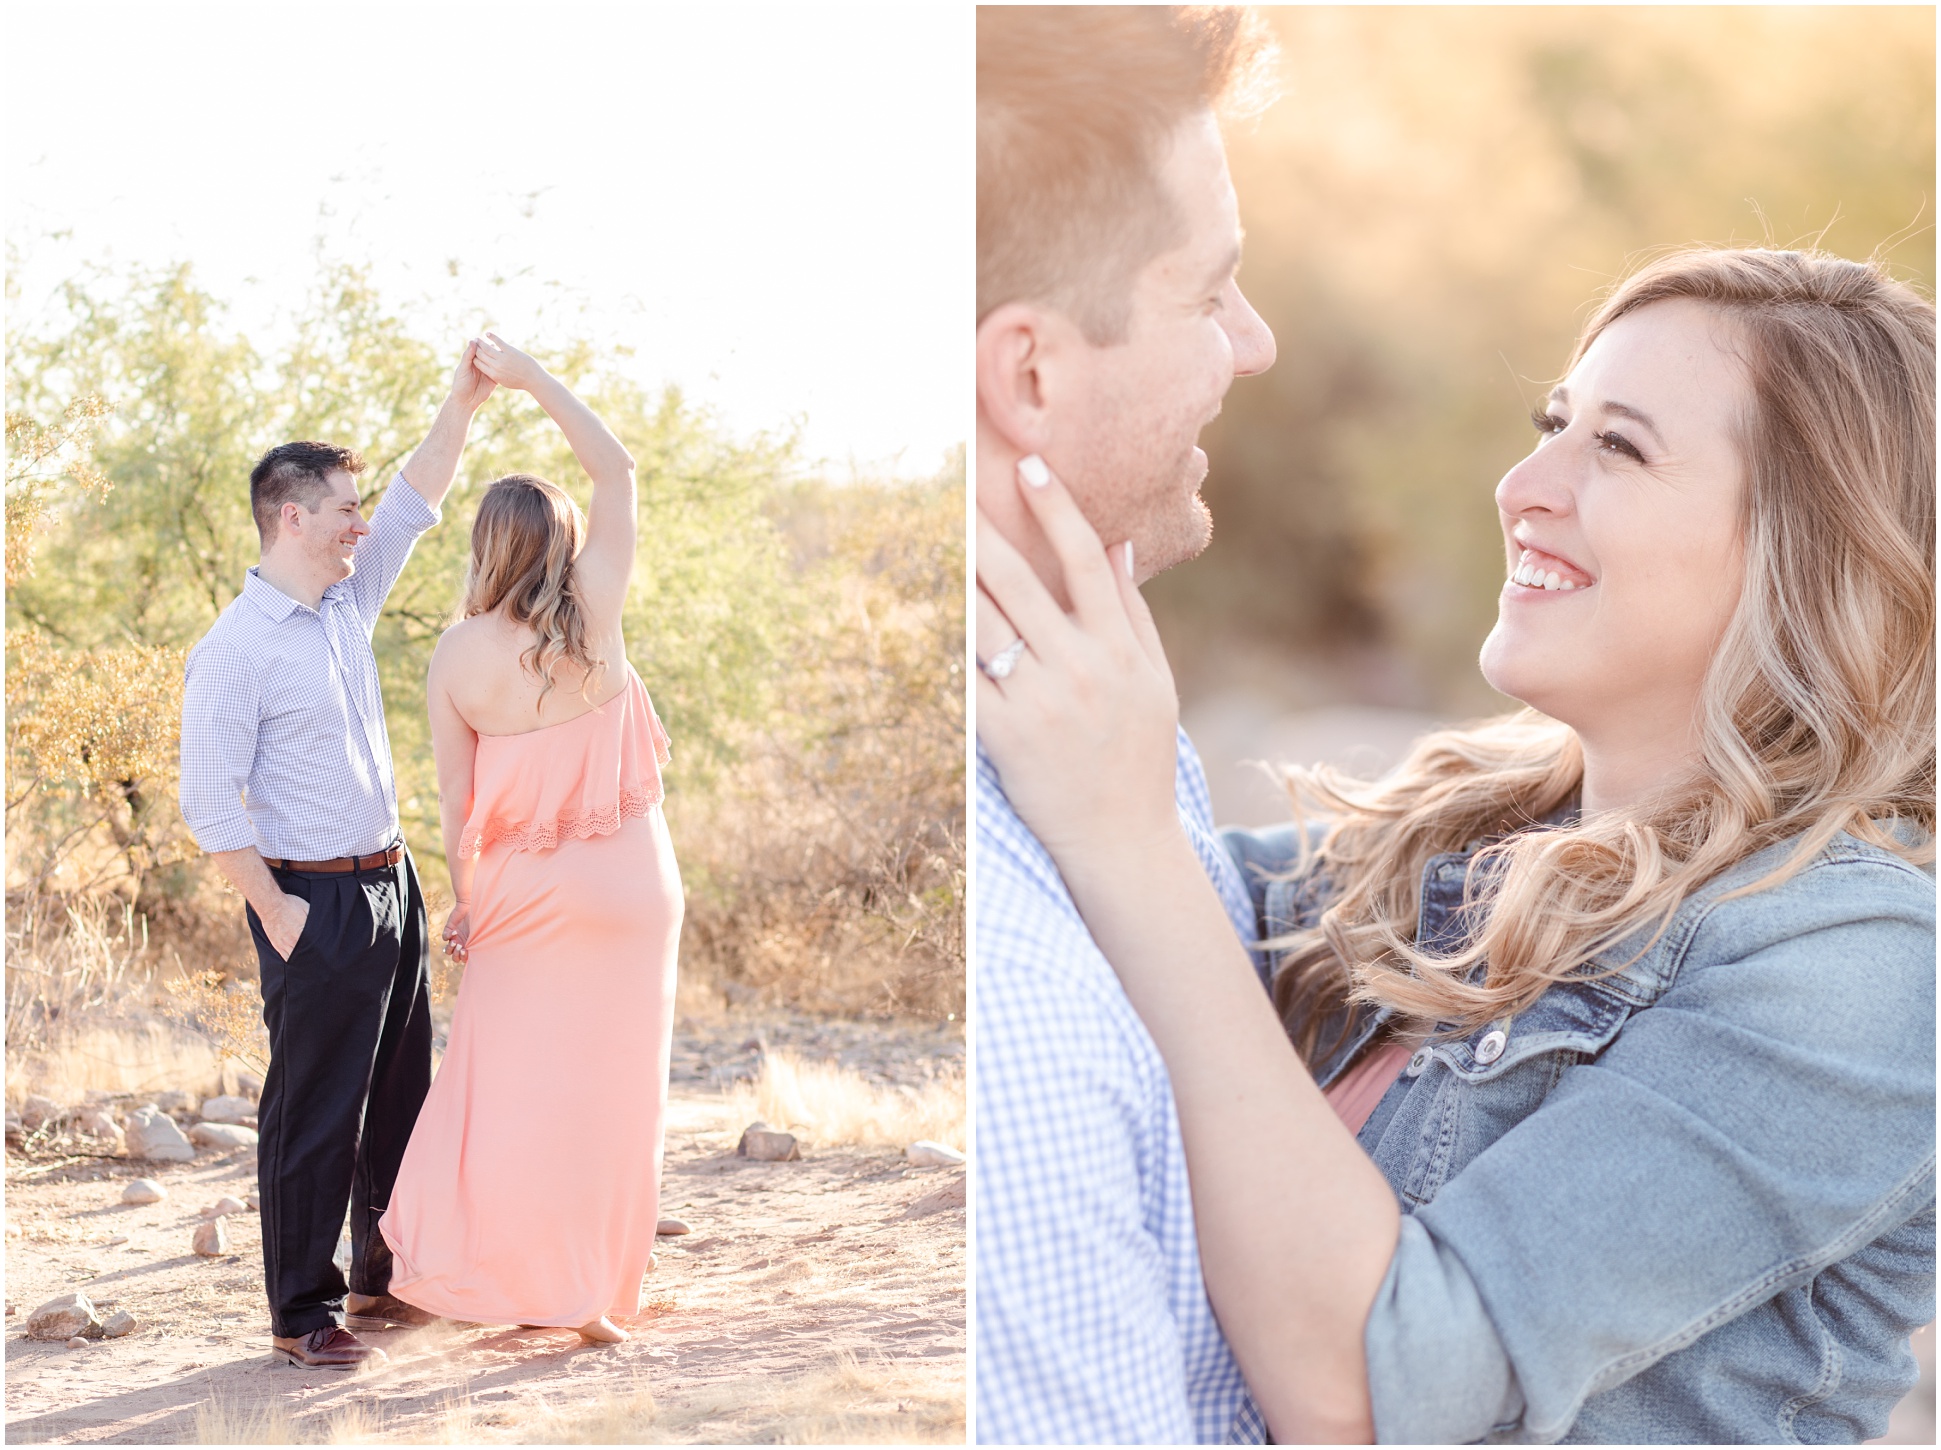 Left Photo: Male twirling Female in salmon colored dress at Phon D Sutton Recreational Park Right Photo: Bride giggling as she gazes into grooms eyes